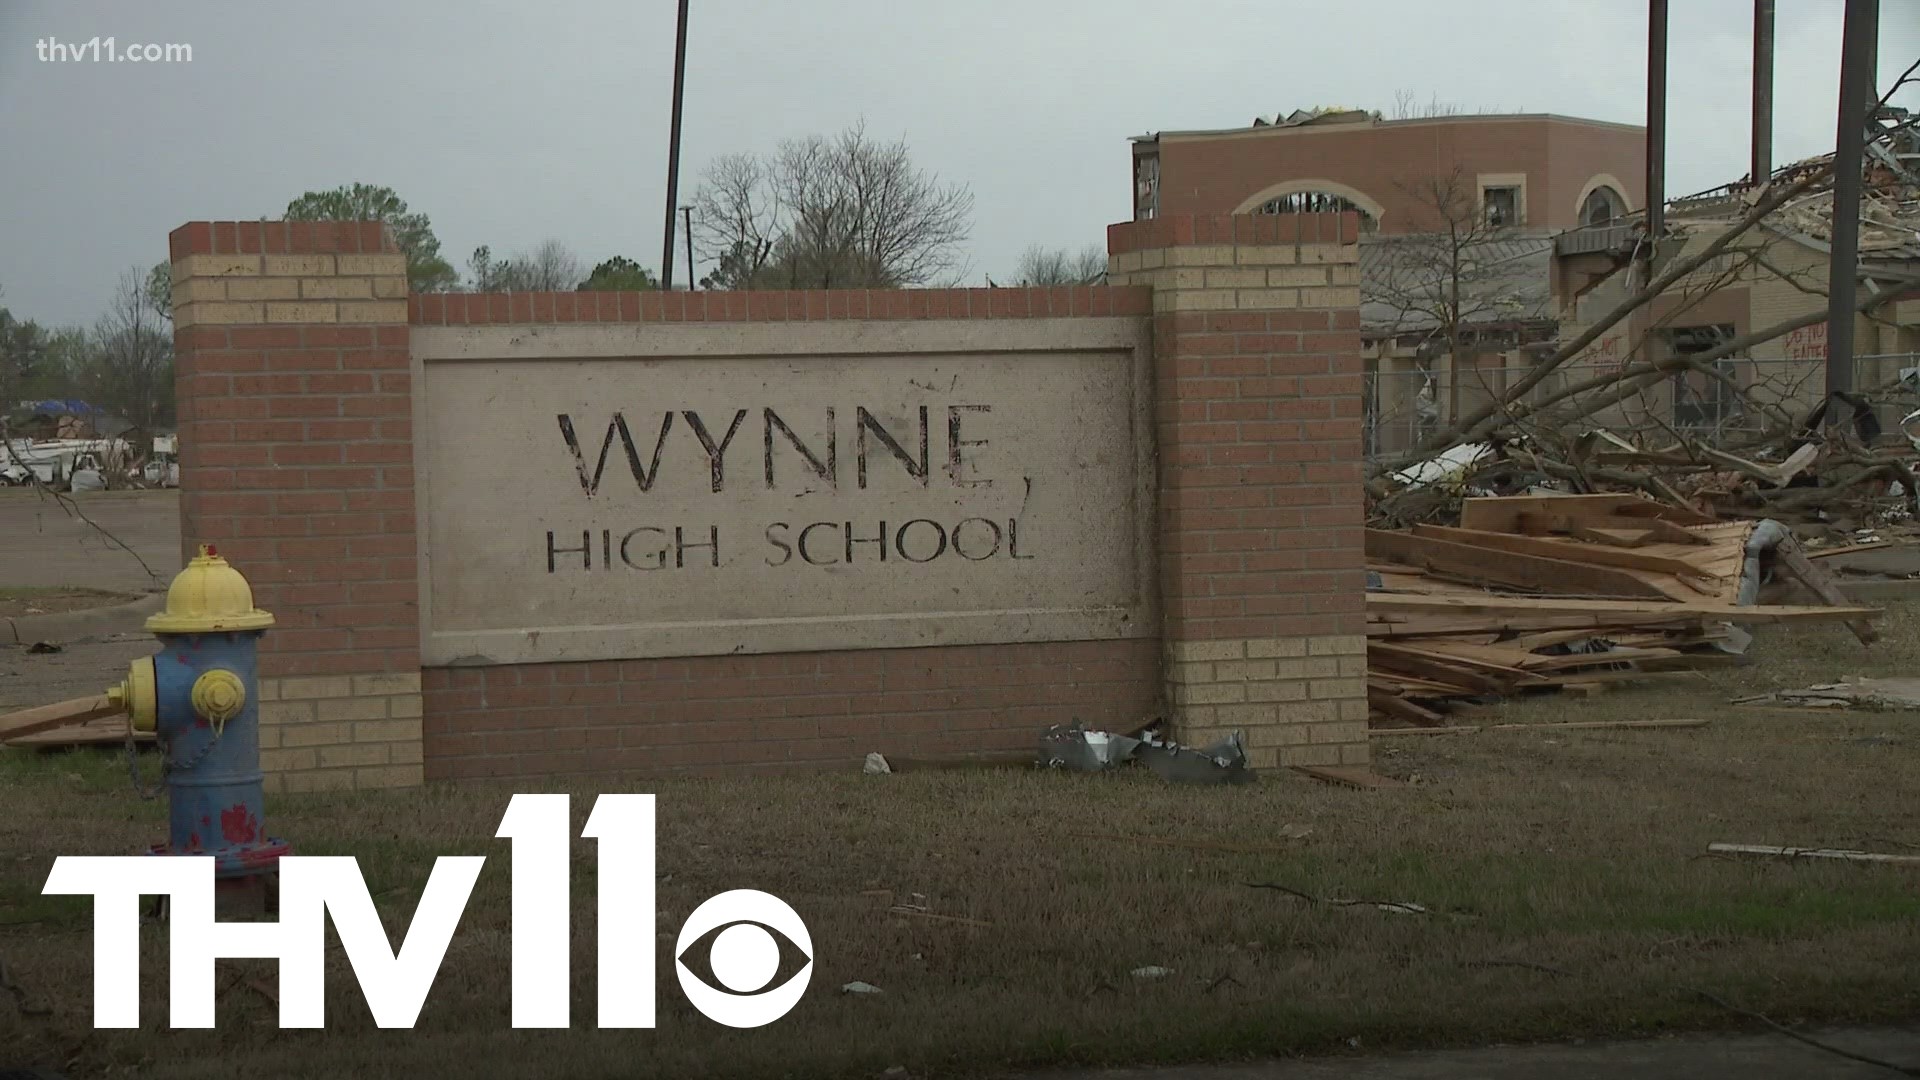 Students who attend Wynne High School will return to school on April 12 for the first time after a tornado demolished buildings almost two weeks ago.